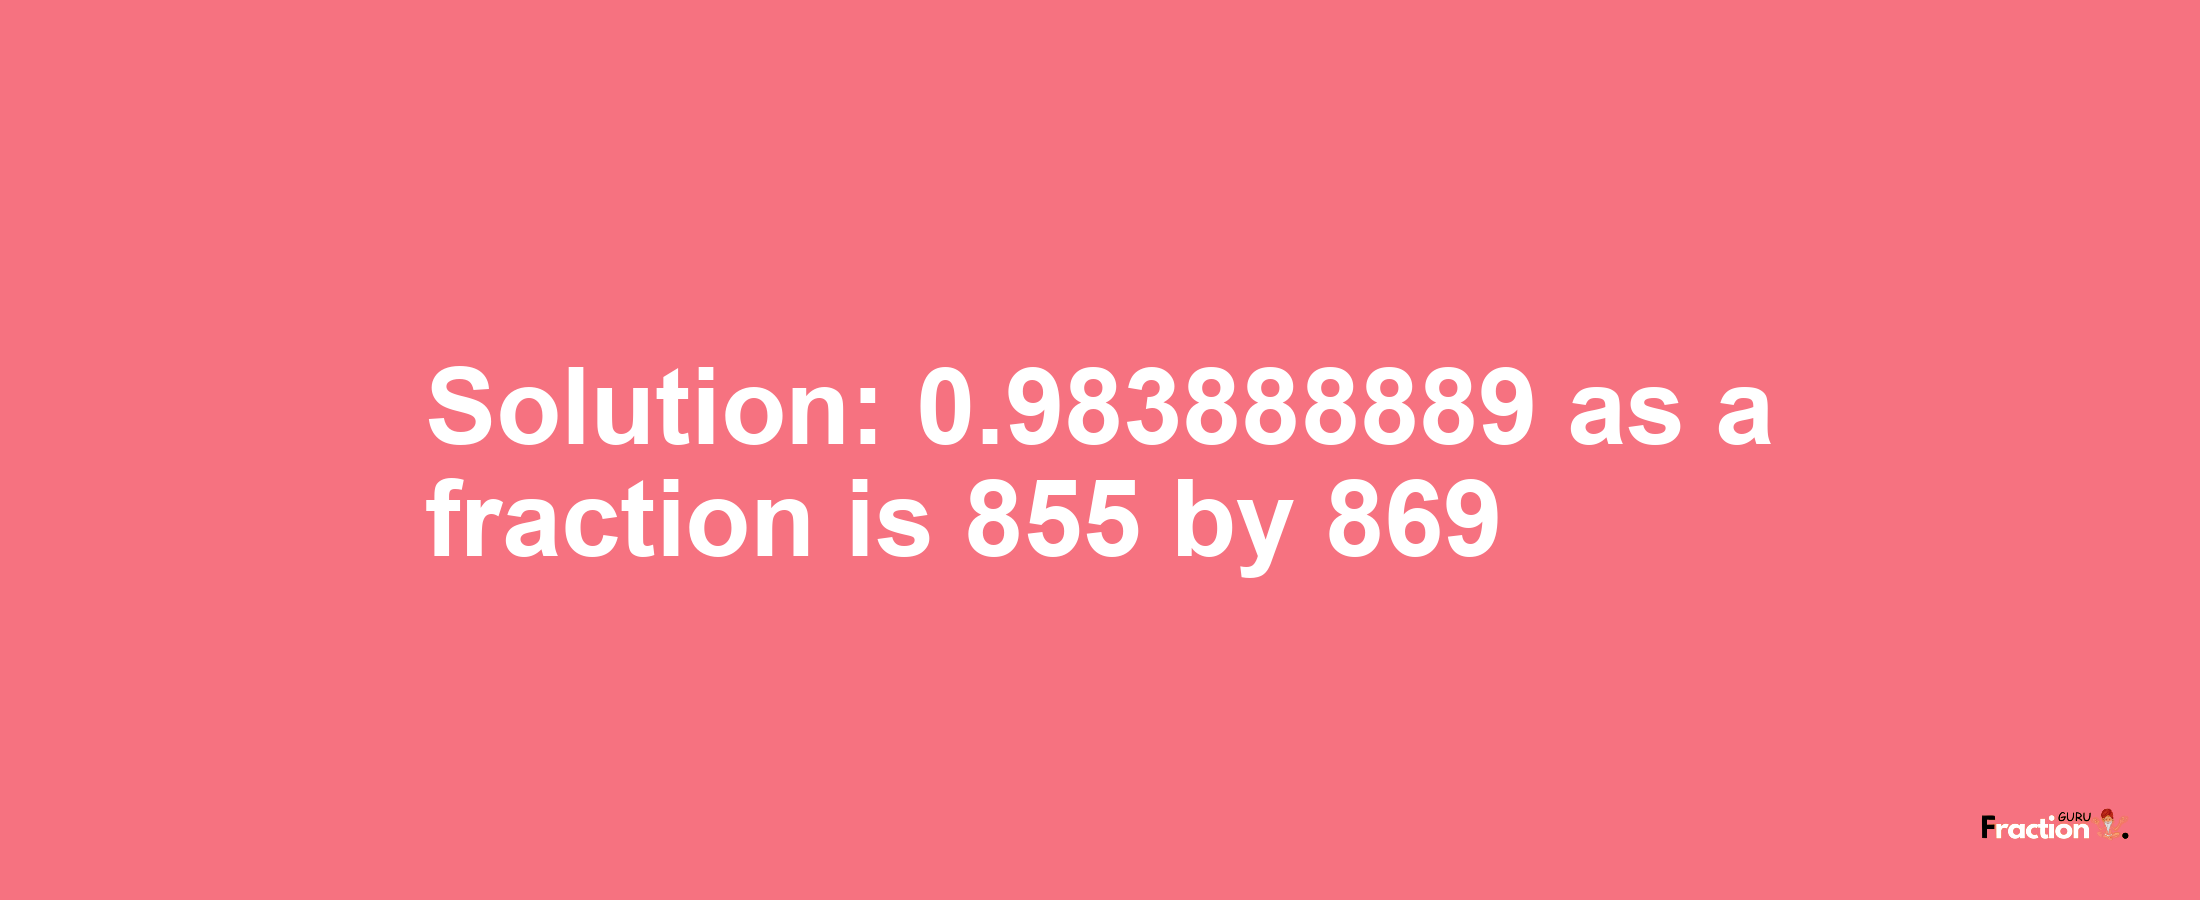 Solution:0.983888889 as a fraction is 855/869